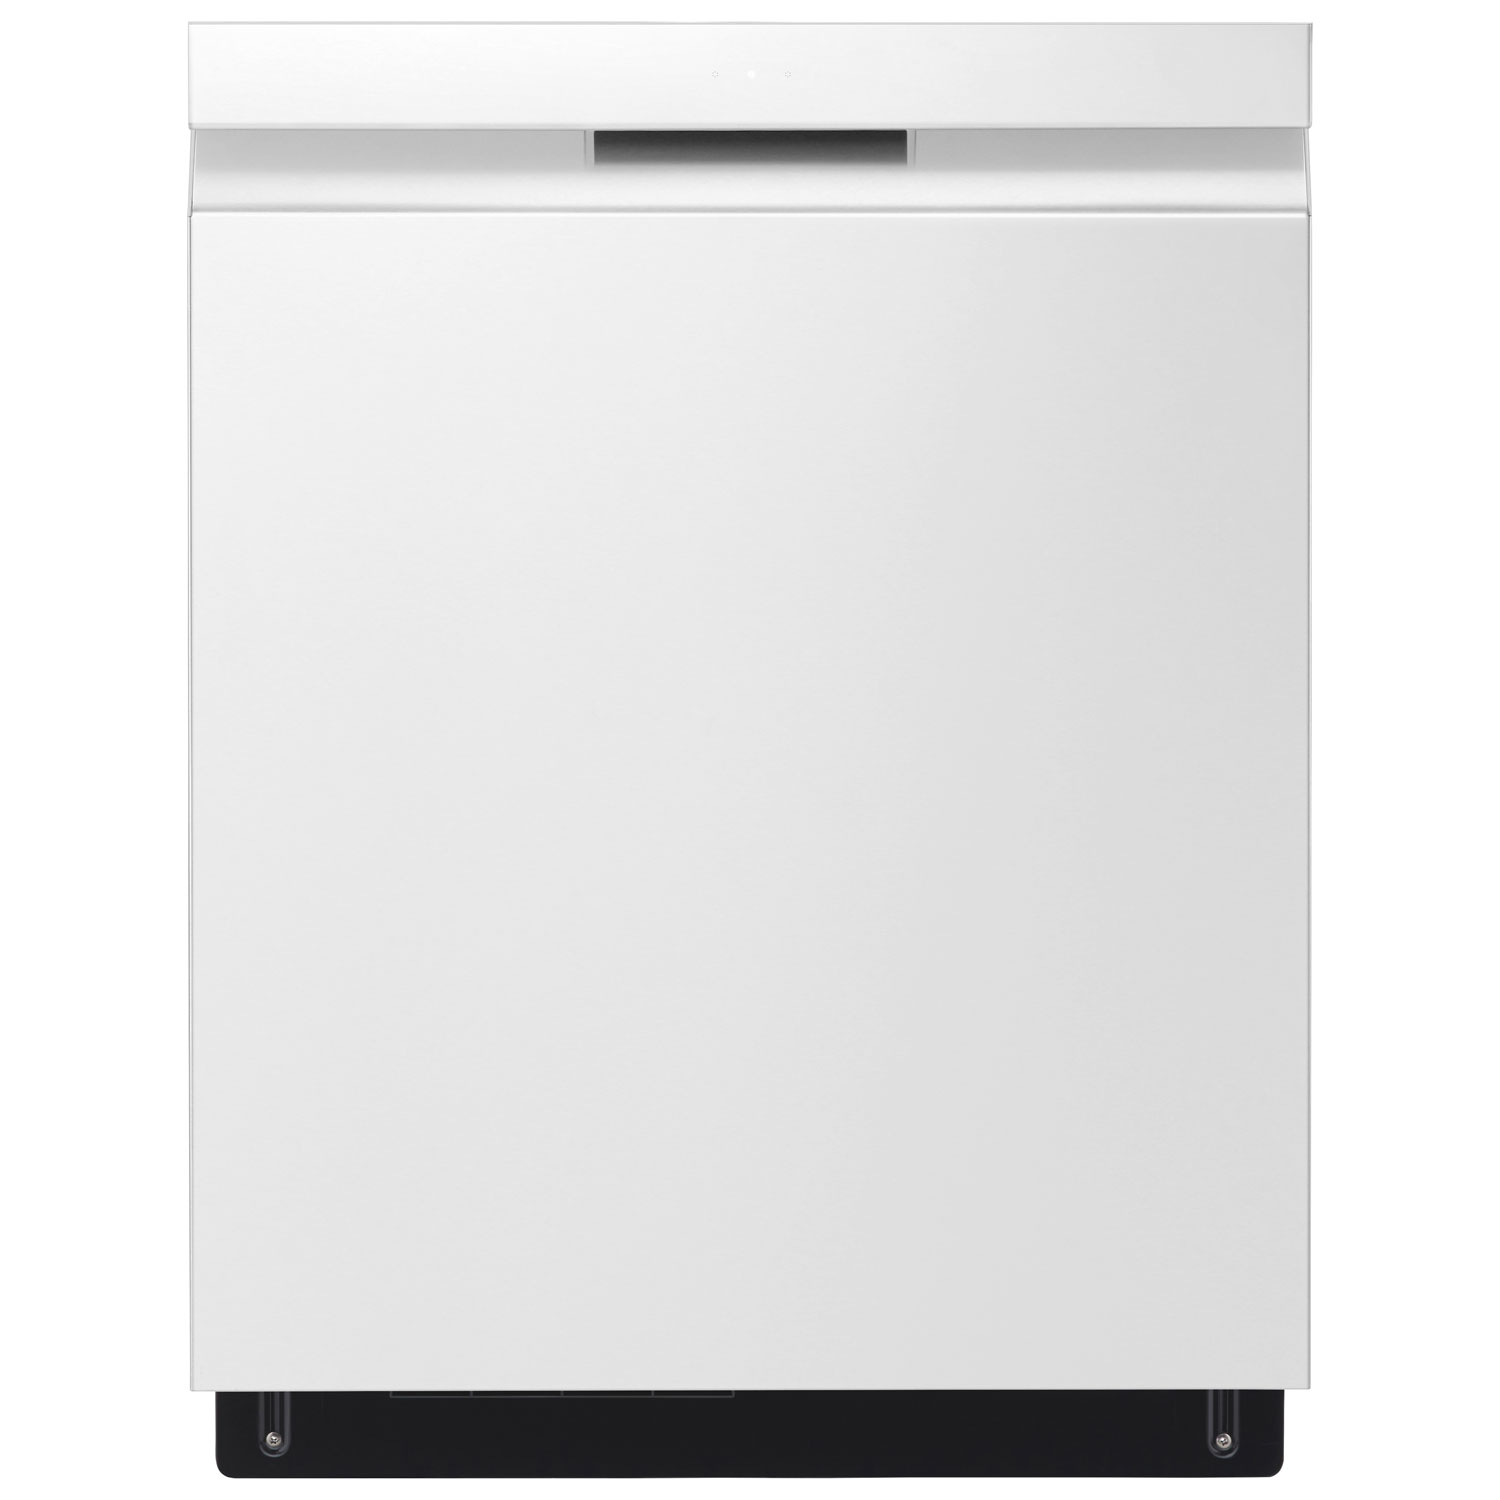 LG 24" 48dB Built-In Dishwasher with Third Rack (LDPN4542W) - White